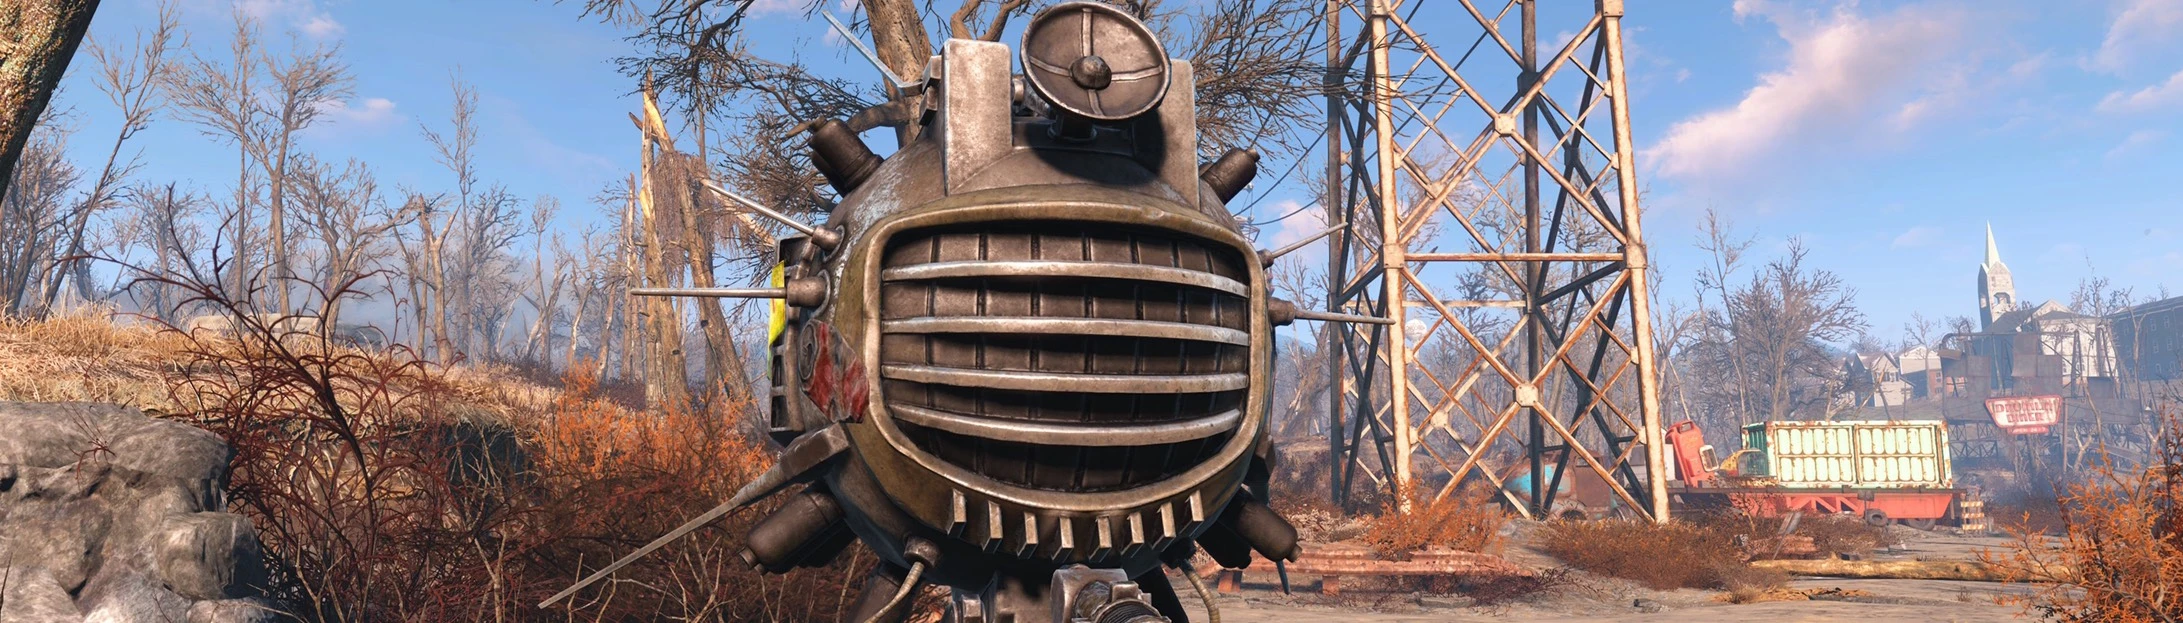 Fallout 3 Companions - Update at Fallout 4 Nexus - Mods and community